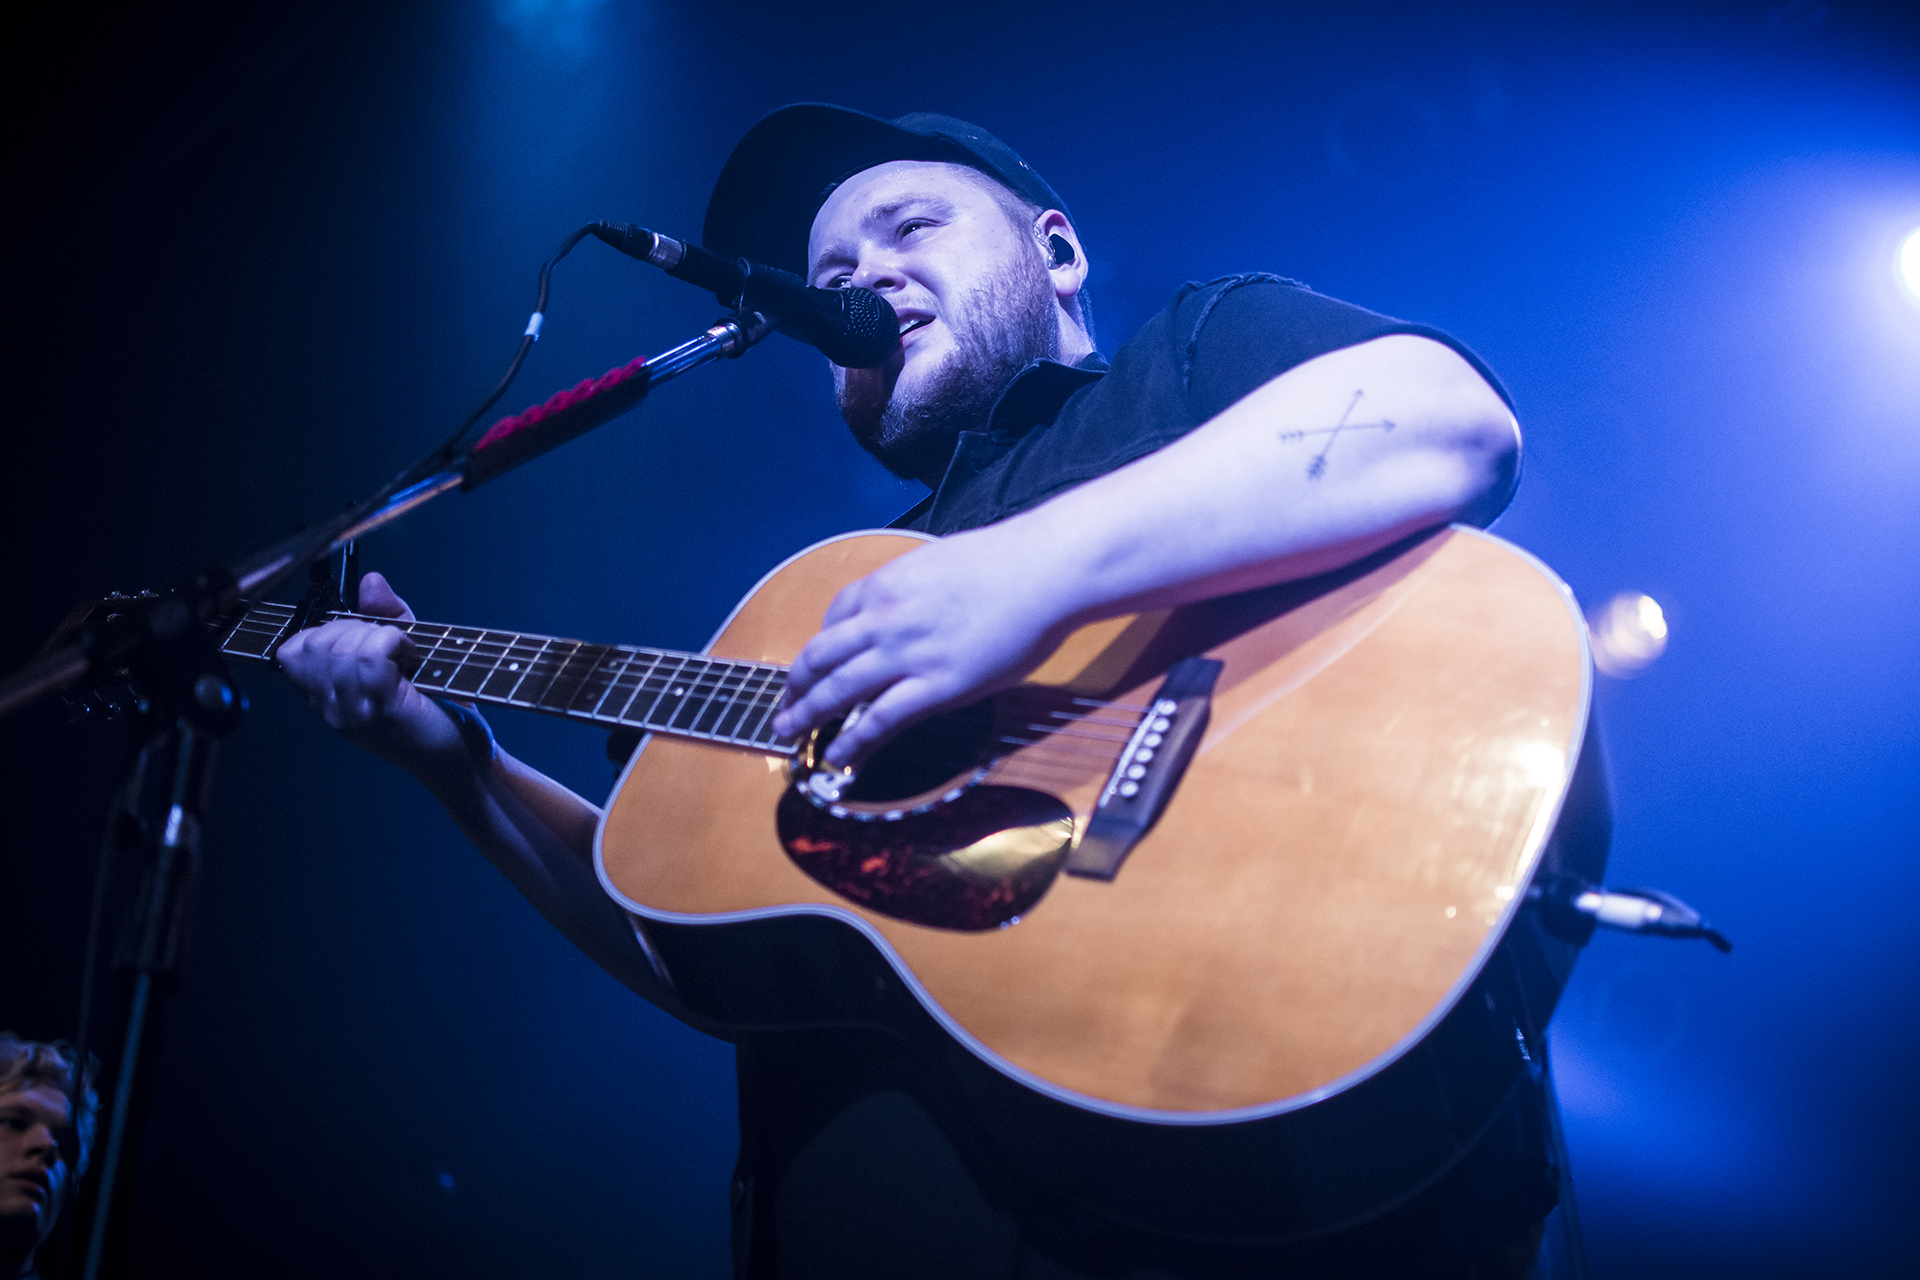 Of-Monsters-And-Men-Niceto-Club-16-Marzo-2016-Lucia-de-la-Torre-Indie-Hoy-4